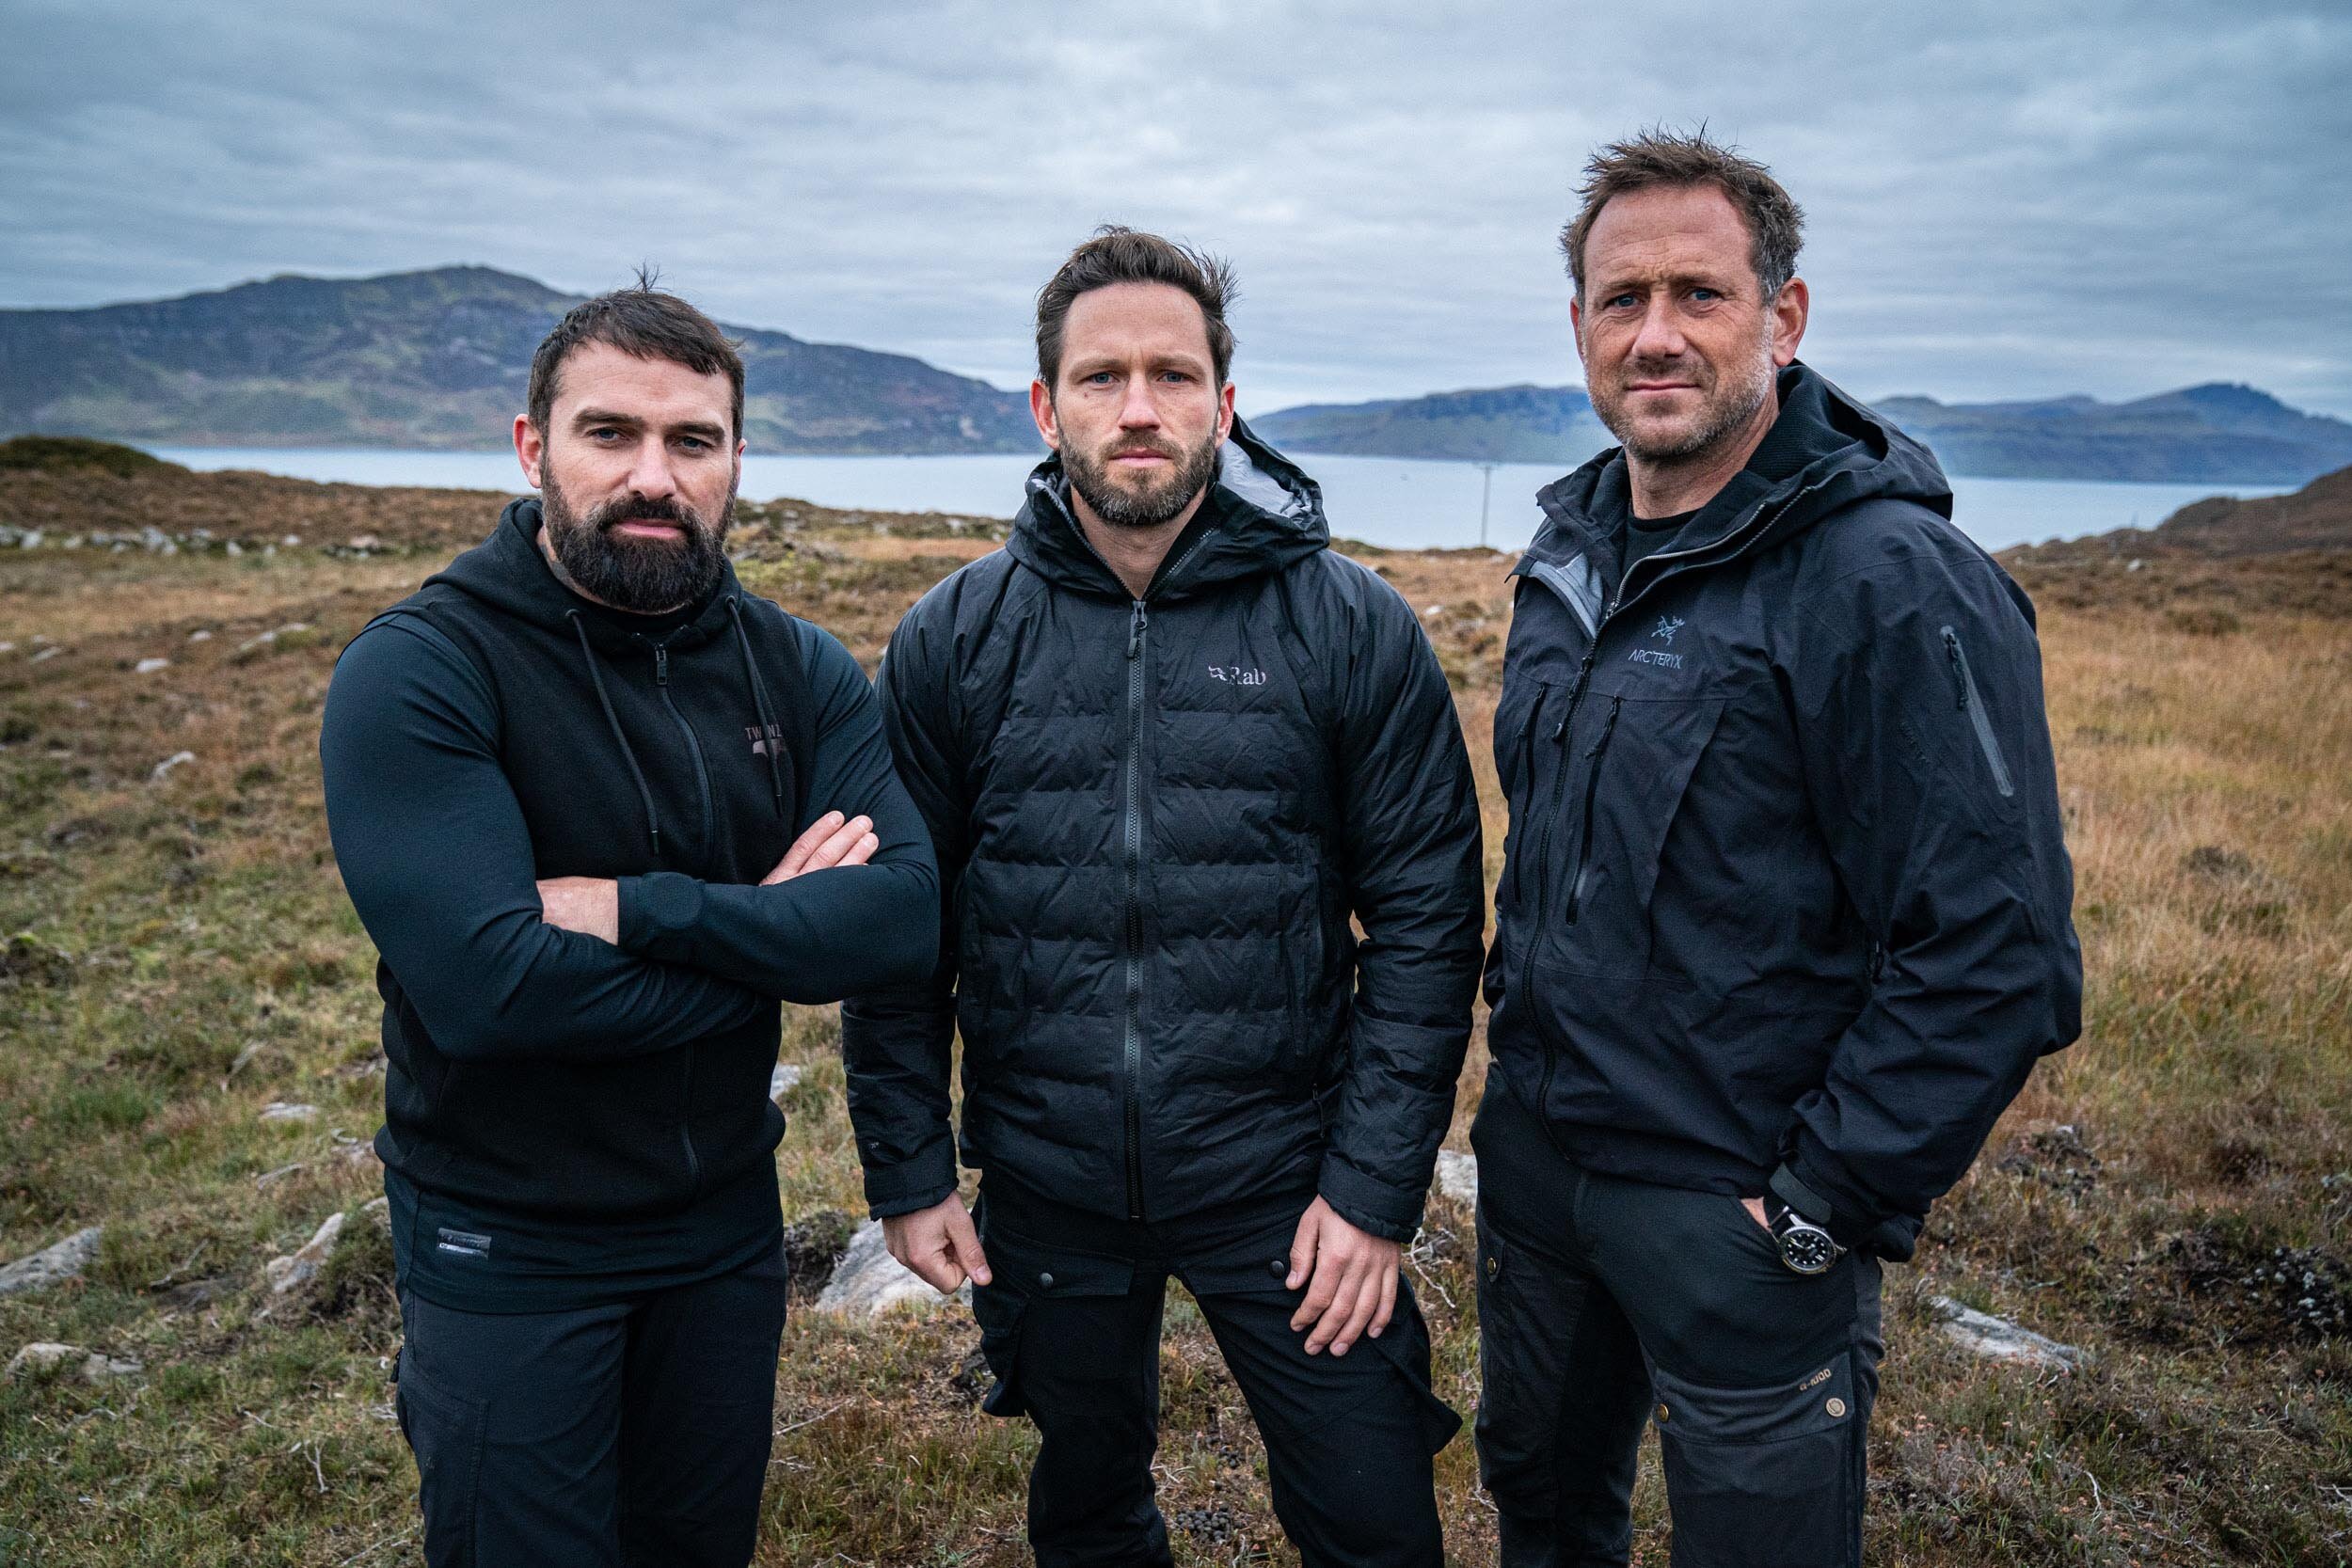  Chief Instructor Ant Middleton, DS Jay Morton and DS Jason Fox  Episode 2 - Murder Ball  Minnow Films / Channel 4 